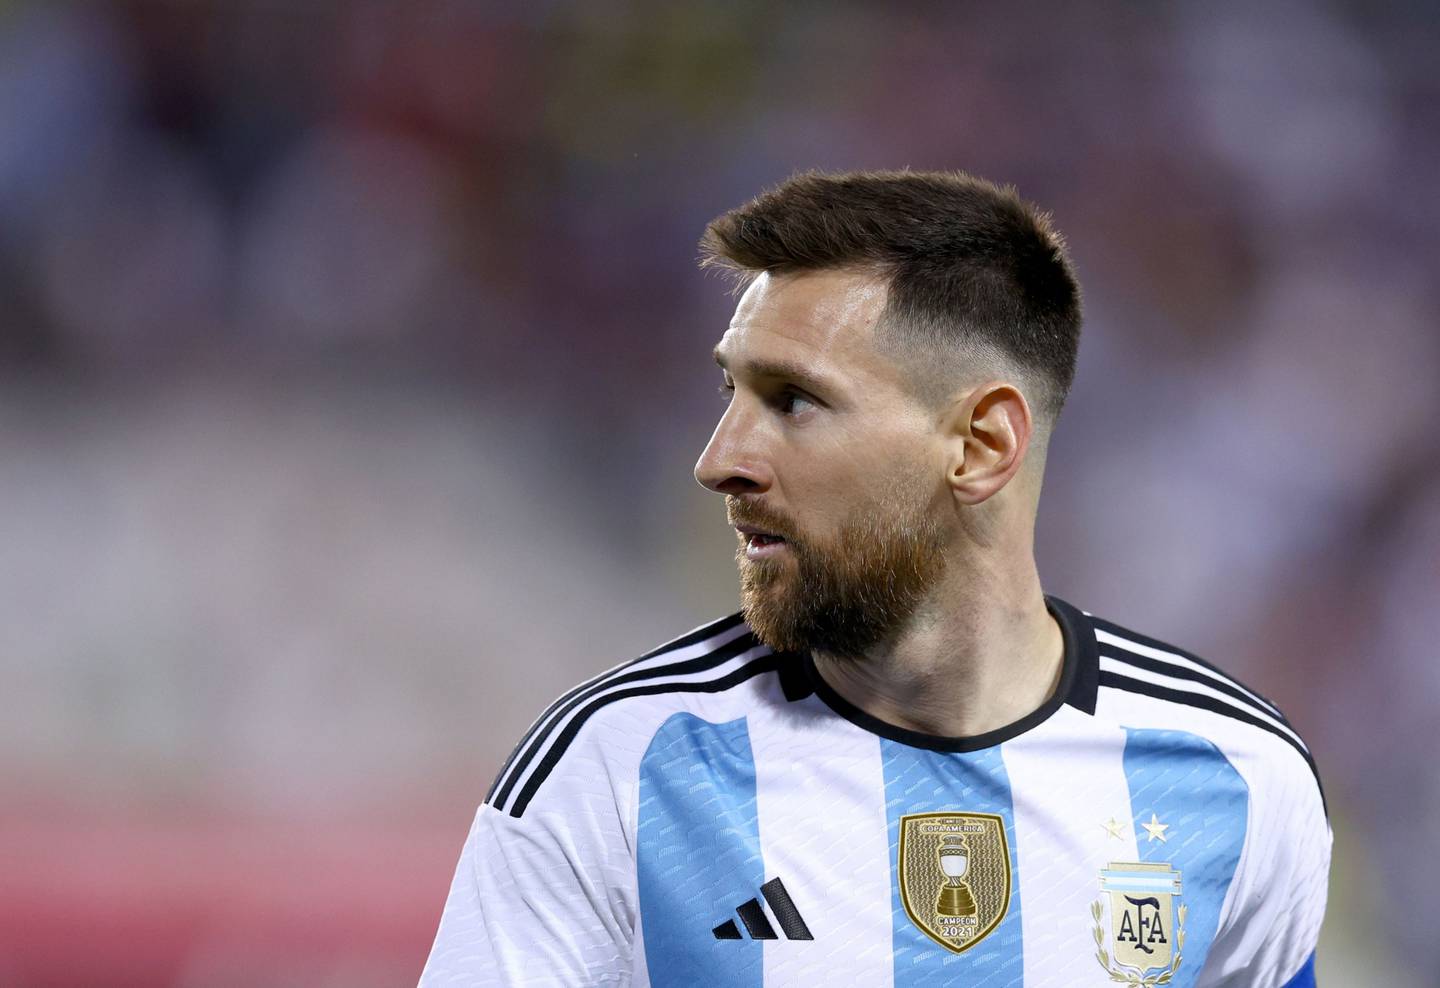 HARRISON, NEW JERSEY - SEPTEMBER 27: Lionel Messi #10 of Argentina reacts in the second half against Jamaica at Red Bull Arena on September 27, 2022 in Harrison, New Jersey. Argentina defeated Jamaica 3-0. (Photo by Elsa/Getty Images)dfd